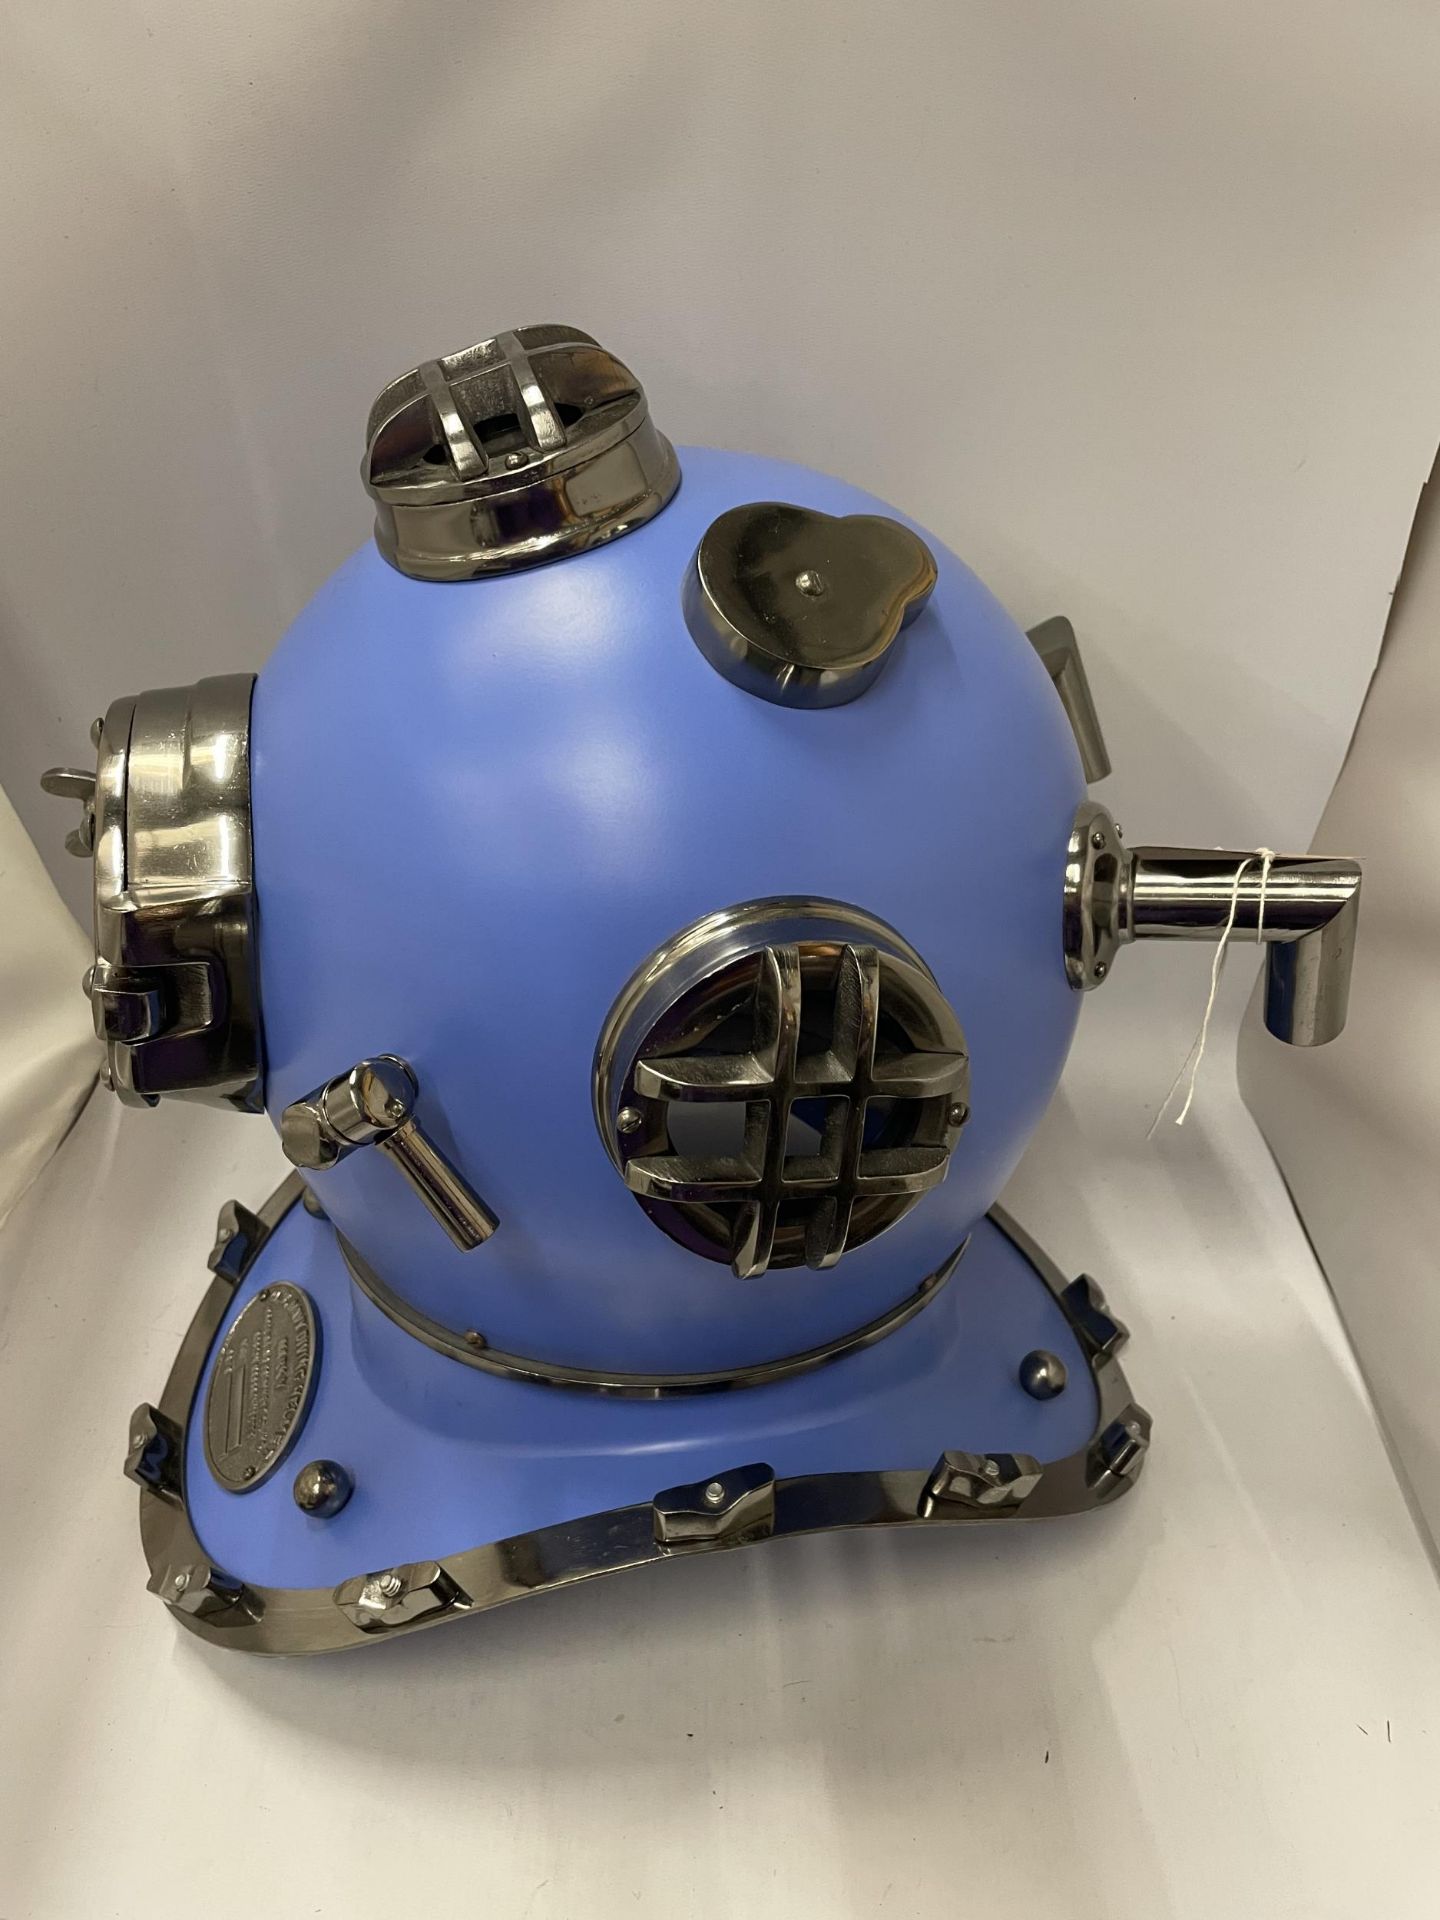 A LARGE BLUE AND CHROME DIVERS HELMET - Image 3 of 5